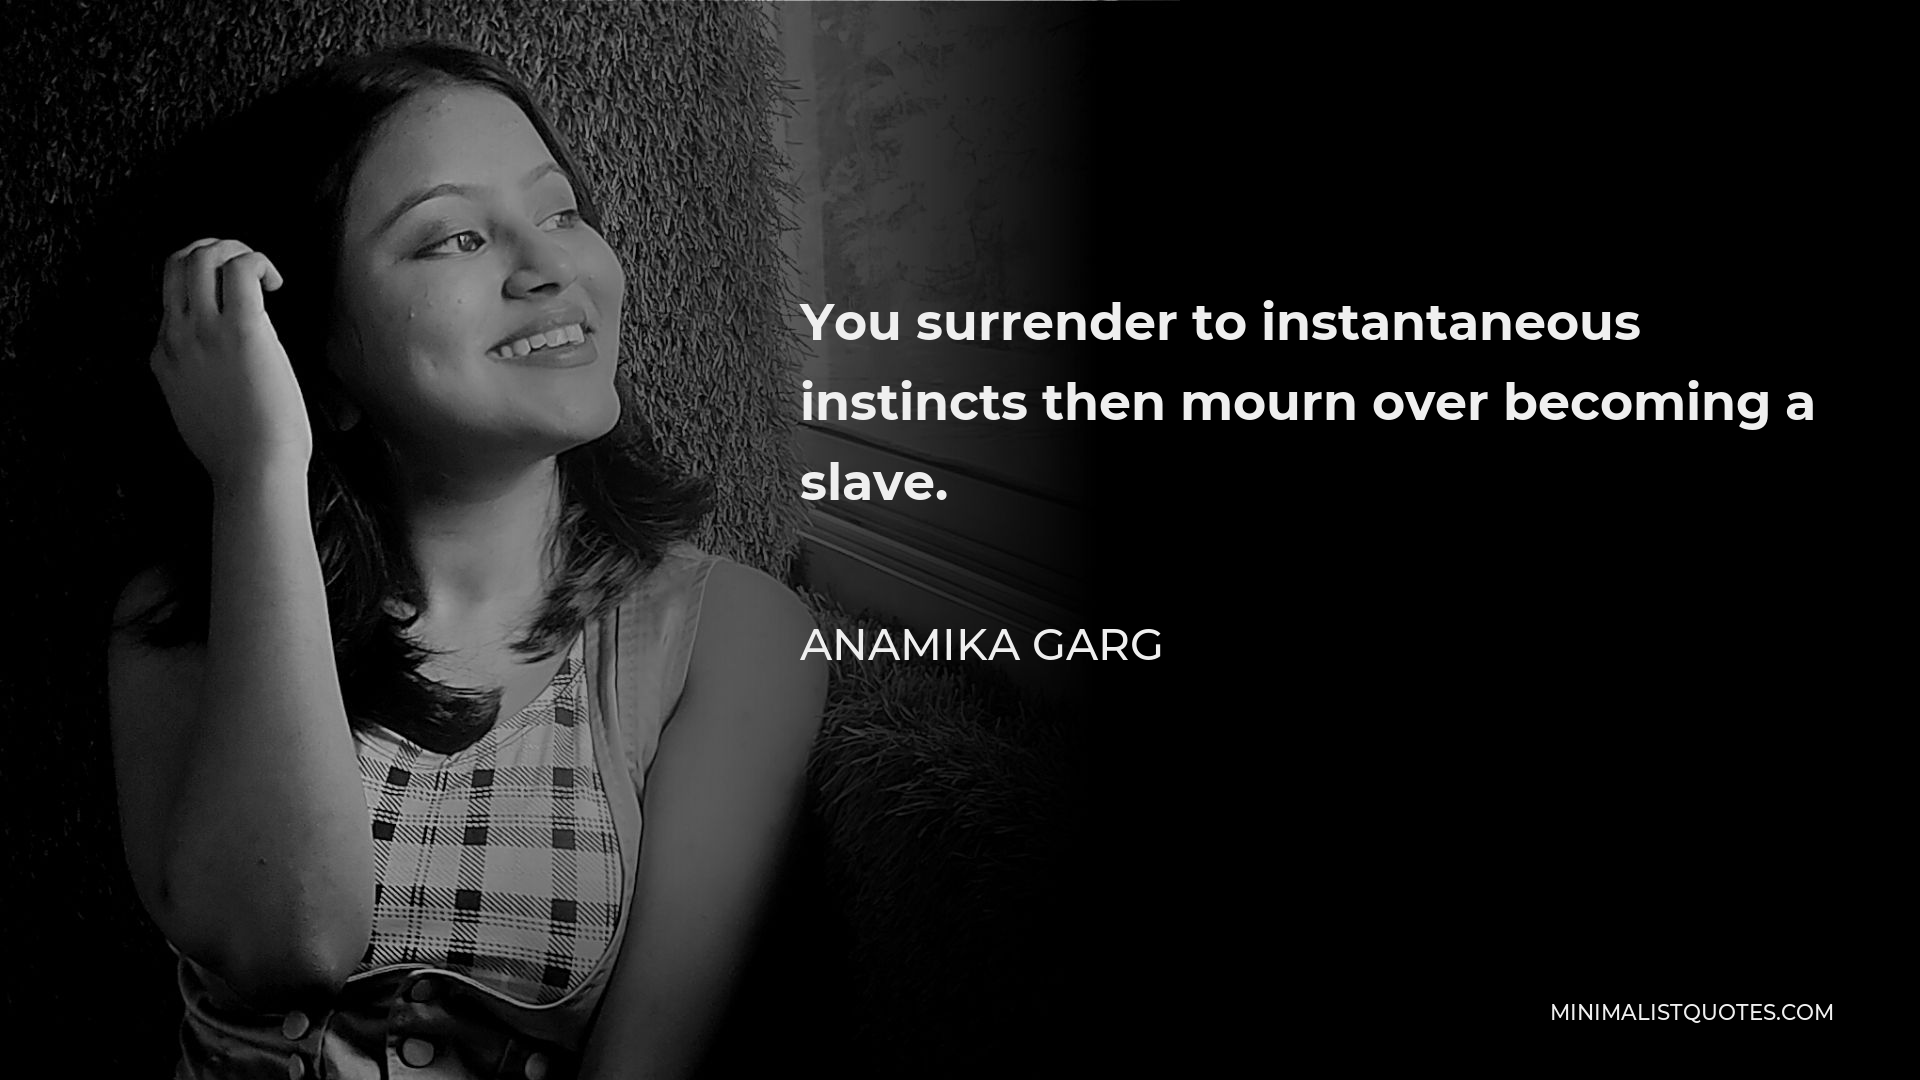 Anamika Garg Quote - You surrender to instantaneous instincts then mourn over becoming a slave.